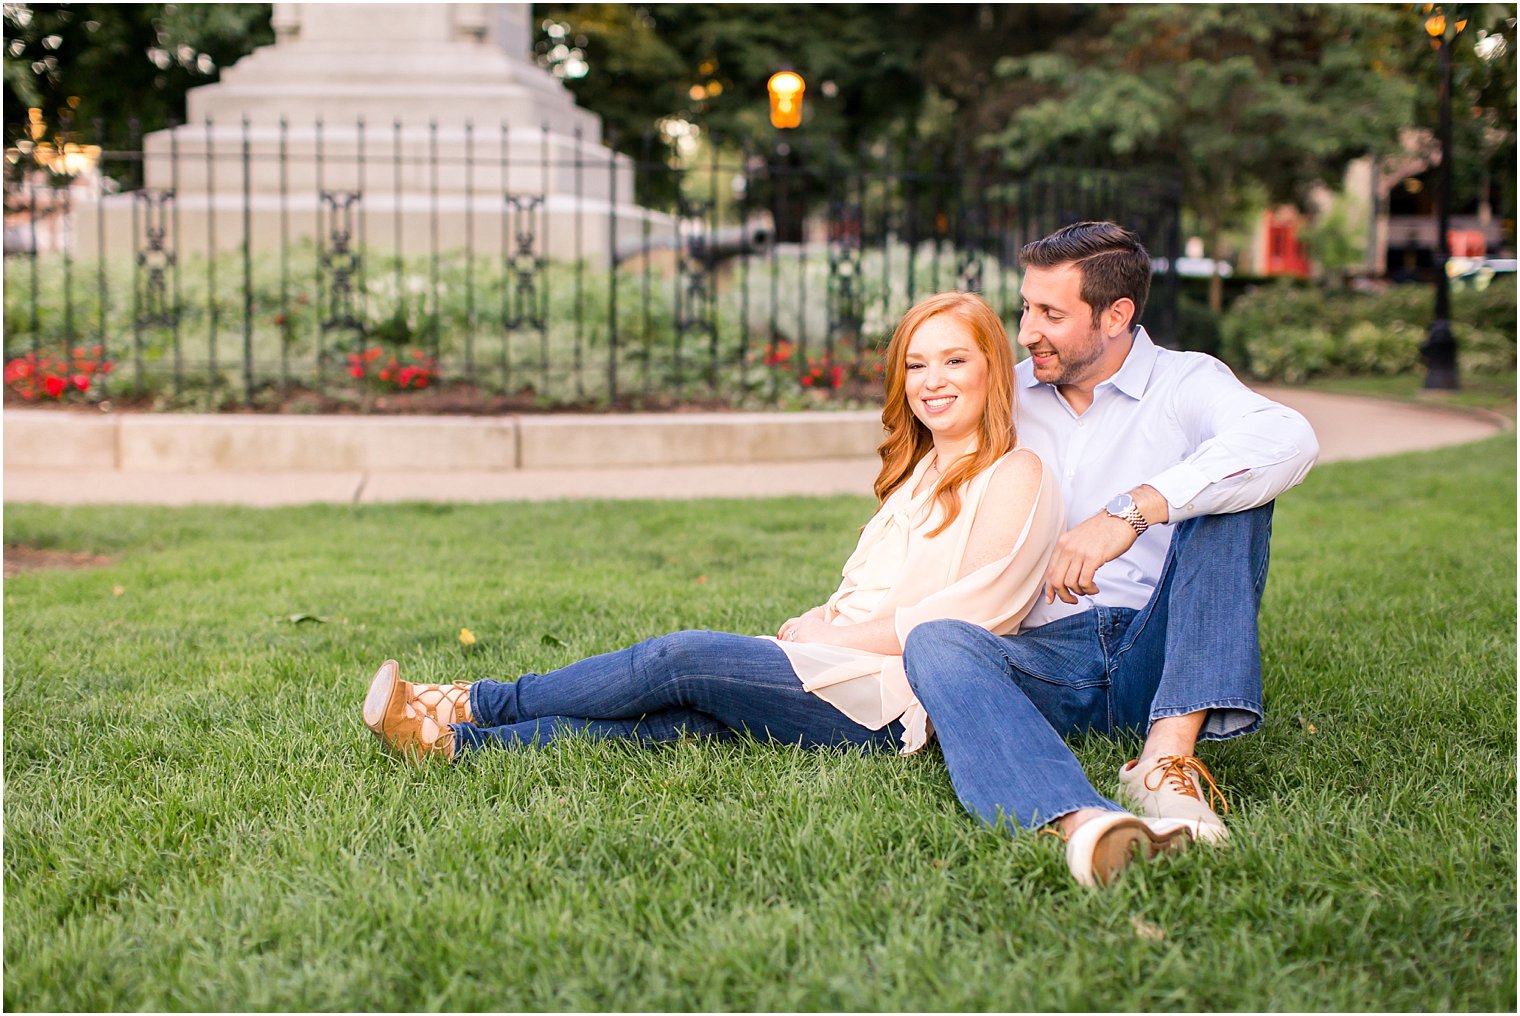 Bride and groom sitting on grass